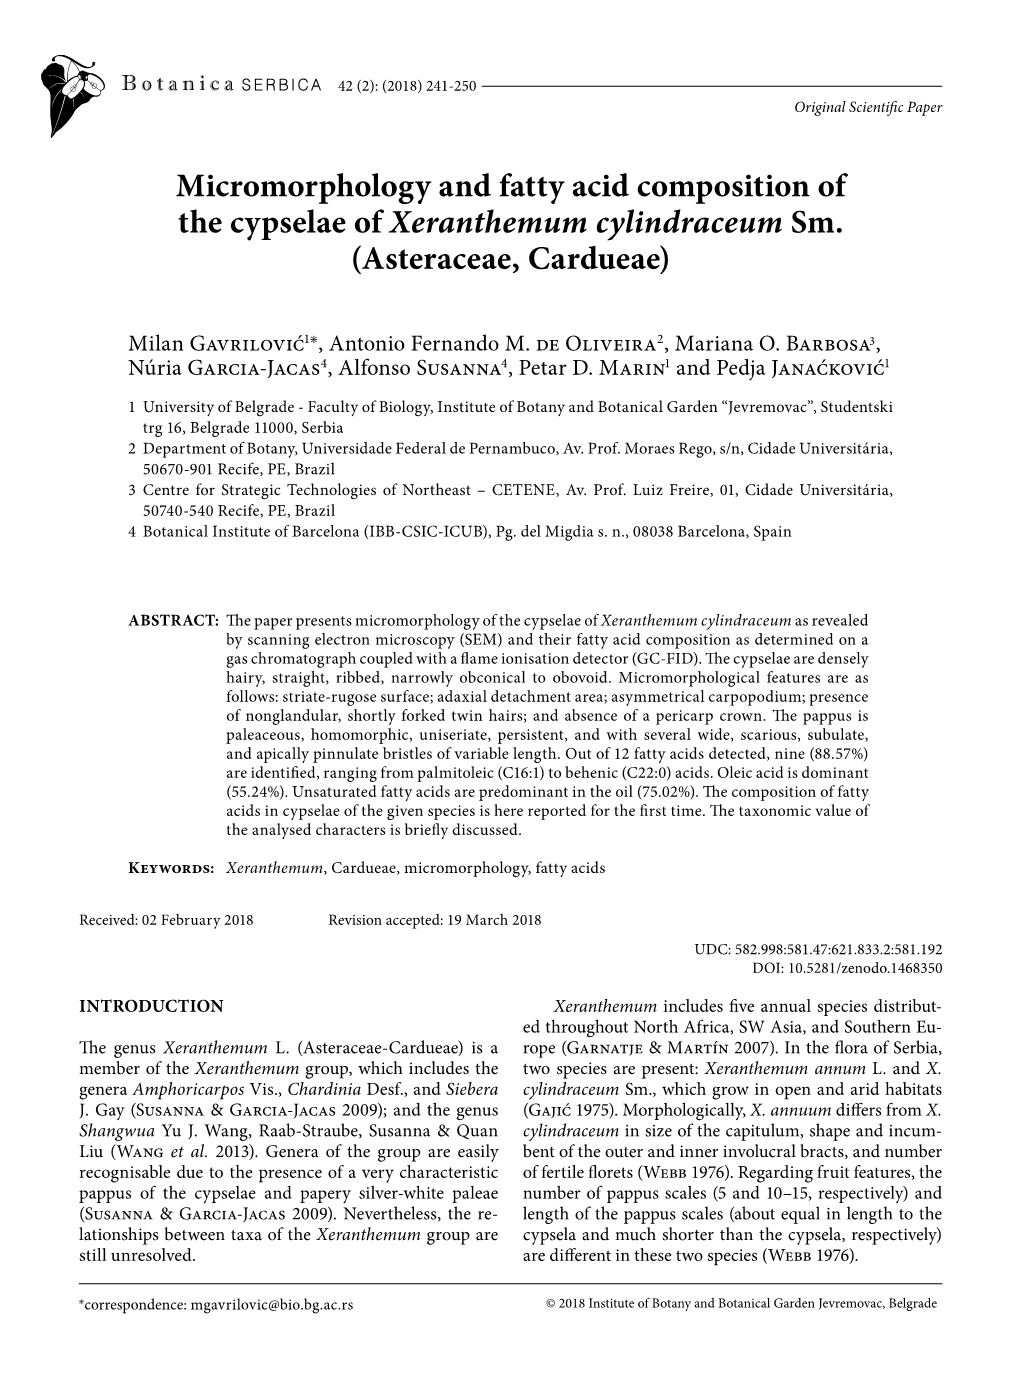 Micromorphology and Fatty Acid Composition of the Cypselae of Xeranthemum Cylindraceum Sm